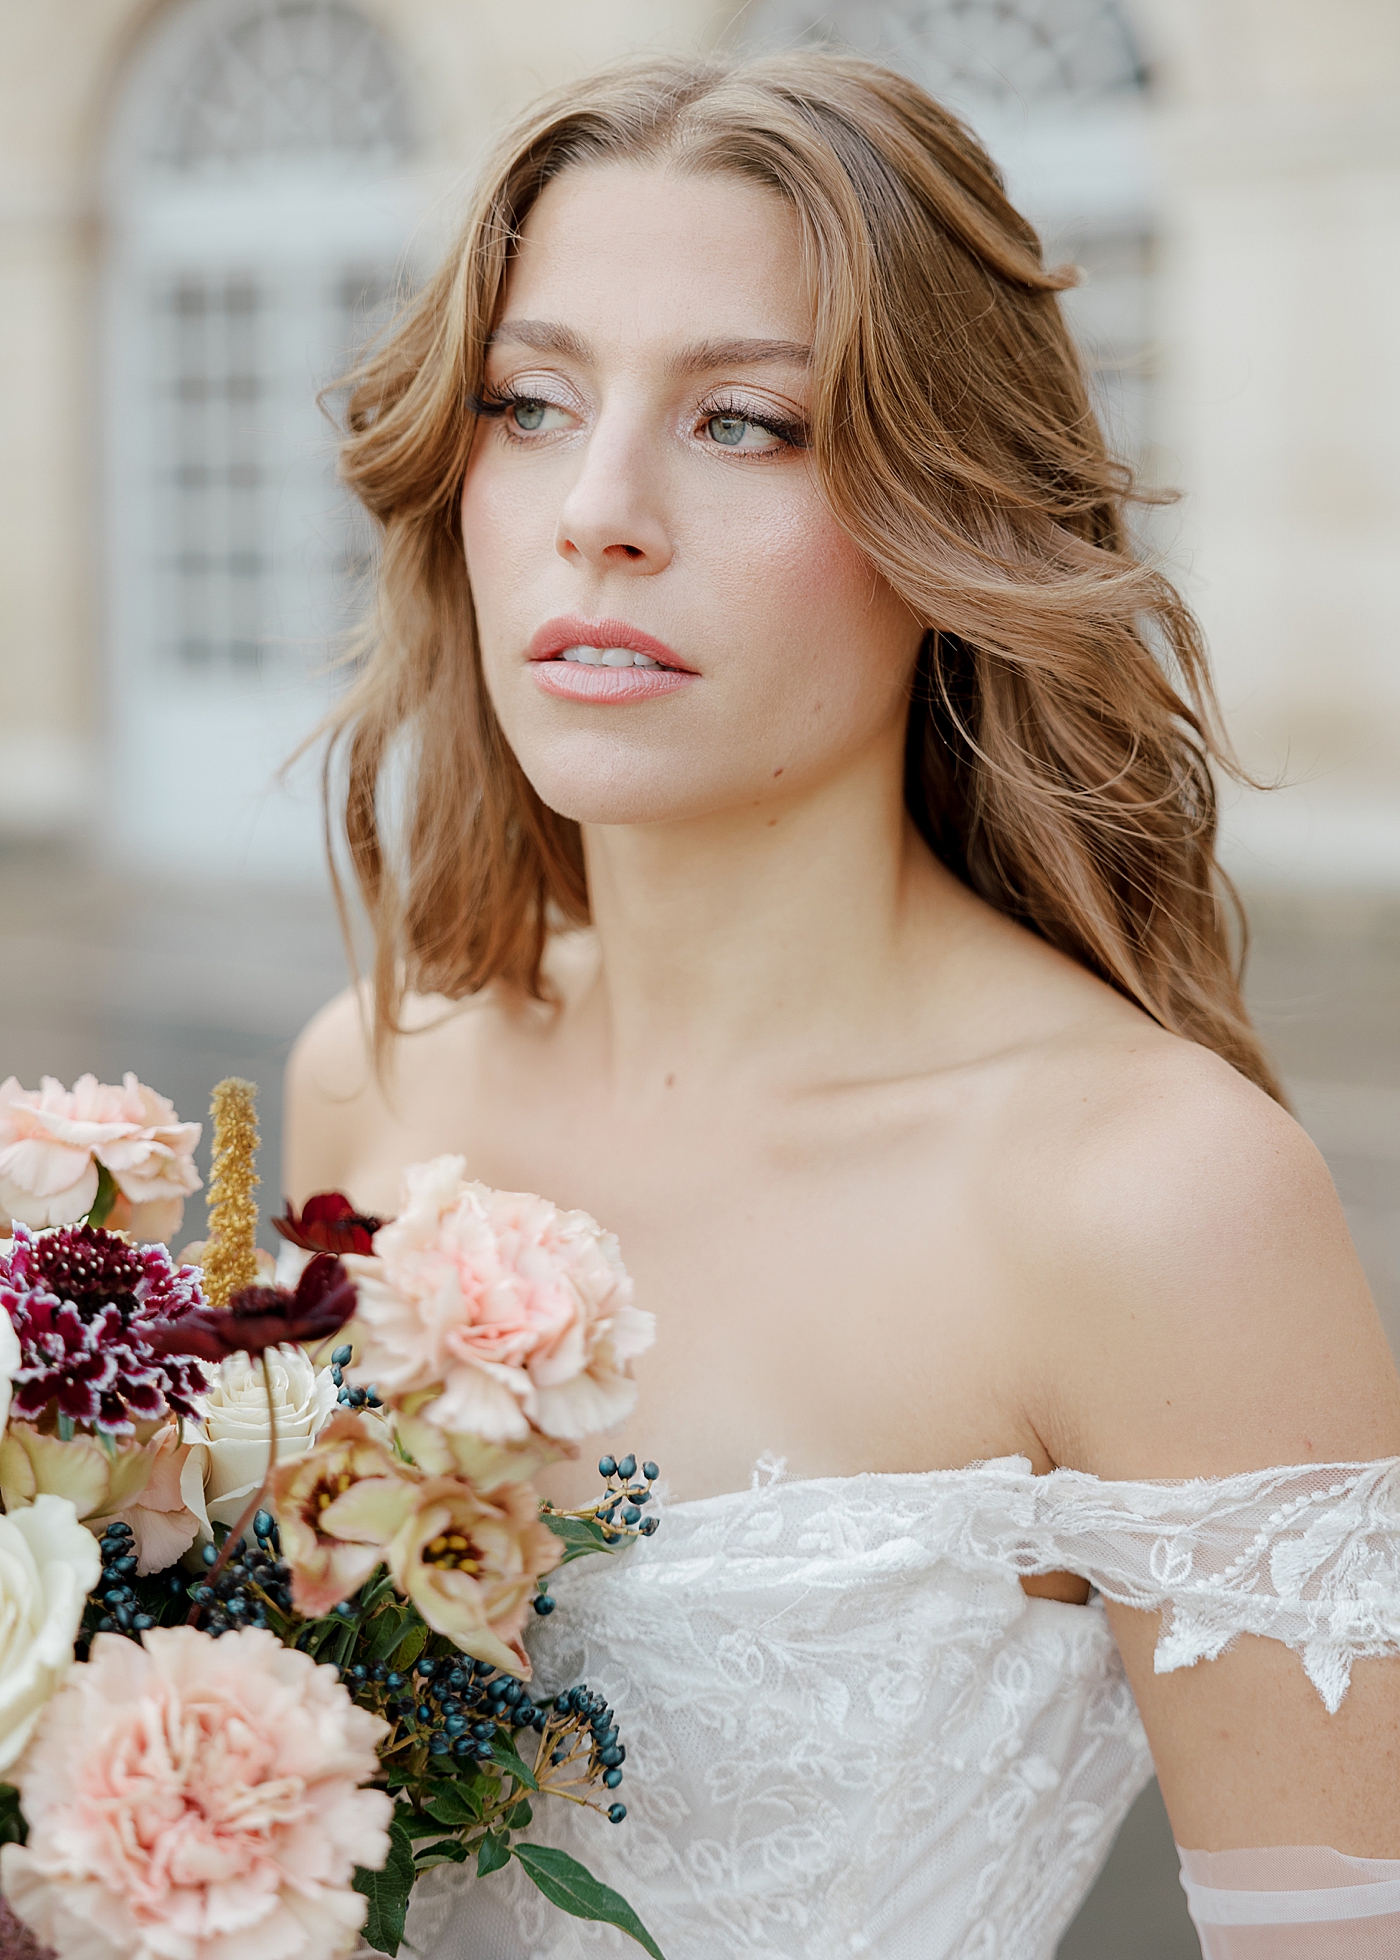 Close up of bride in an off the shoulder dress and white sheer gloves holding a wedding bouquet while looking out at a distance | Image by Hope Helmuth Photography